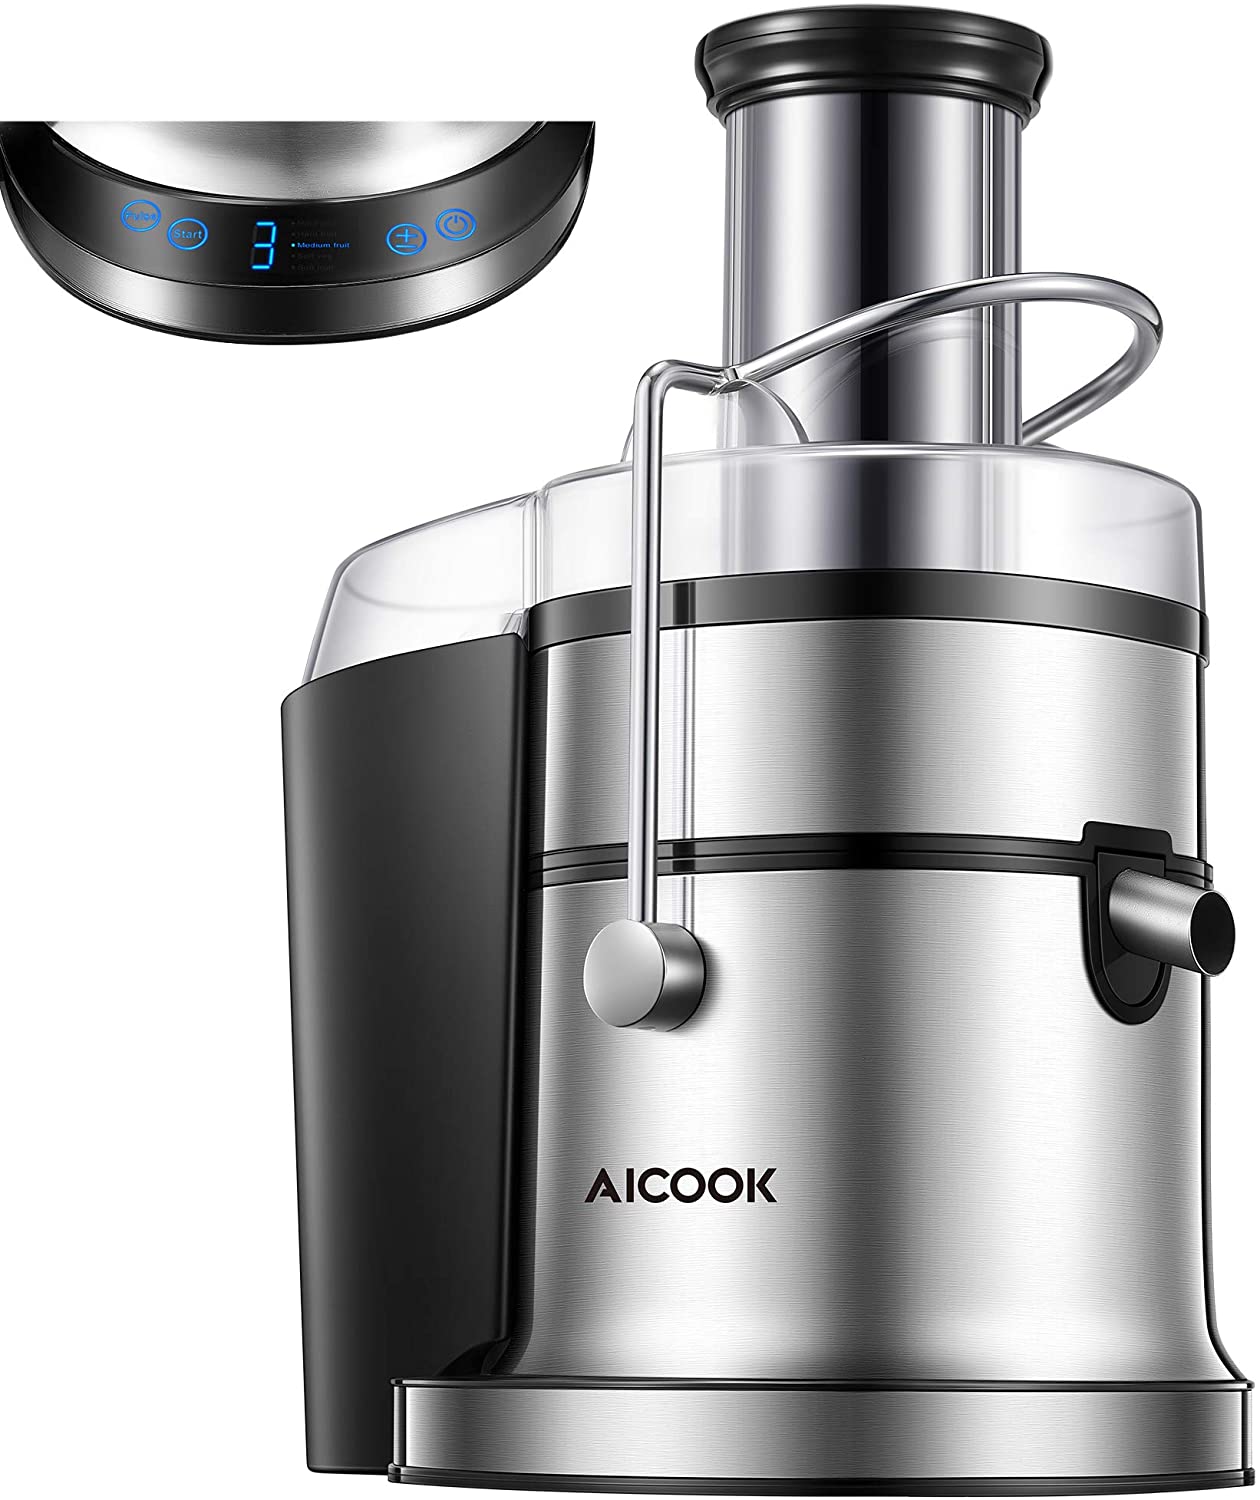 AICOOK | Centrifugal Juicer, 800W Juice Extractor with 5 Settings, Wide Mouth 3" Feed Chute for Whole Fruit Vegetable Juicing Machine, Easy Clean and Assemble, Anti-Drip